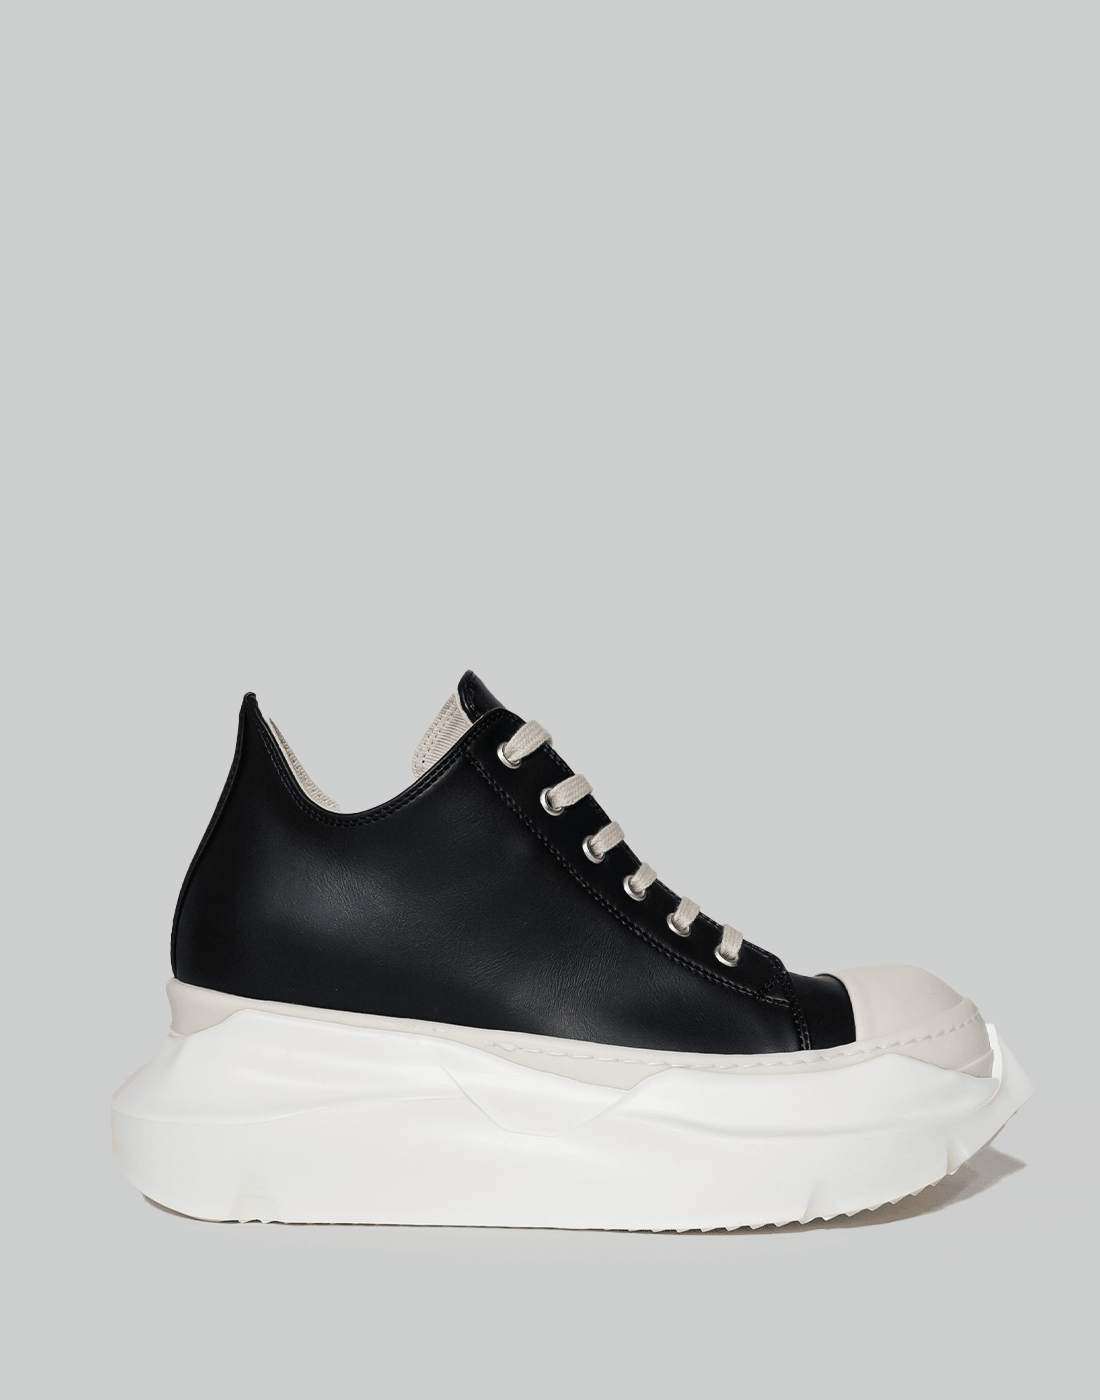 Rick Owens DRKSHDW abstract low 43.5size435 - スニーカー